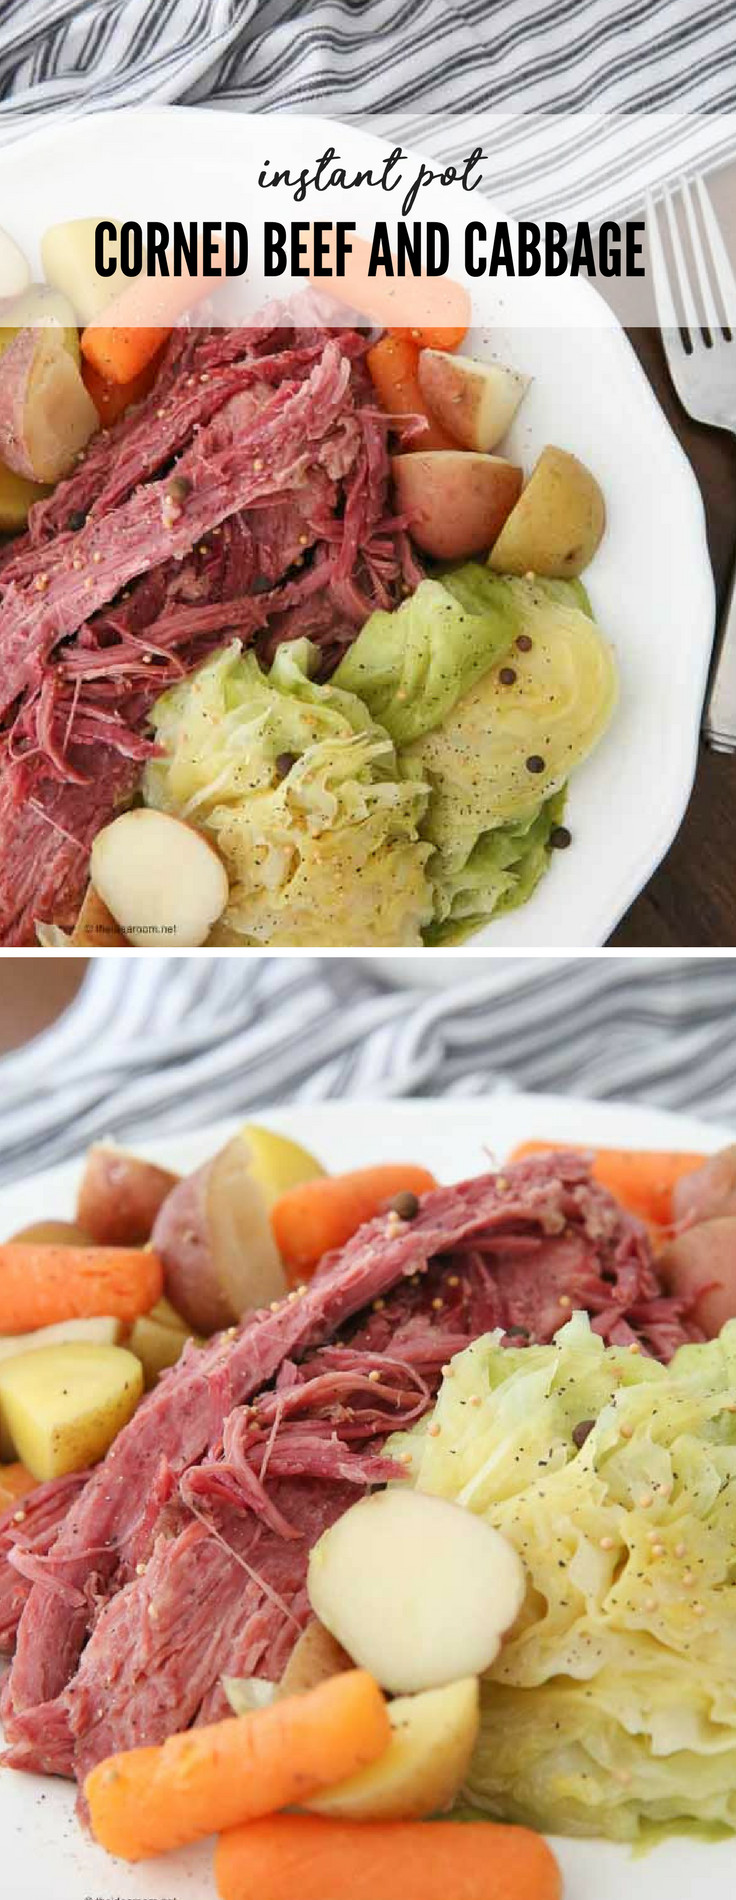 Spices For Corned Beef And Cabbage
 Instant Pot Corned Beef and Cabbage Recipe